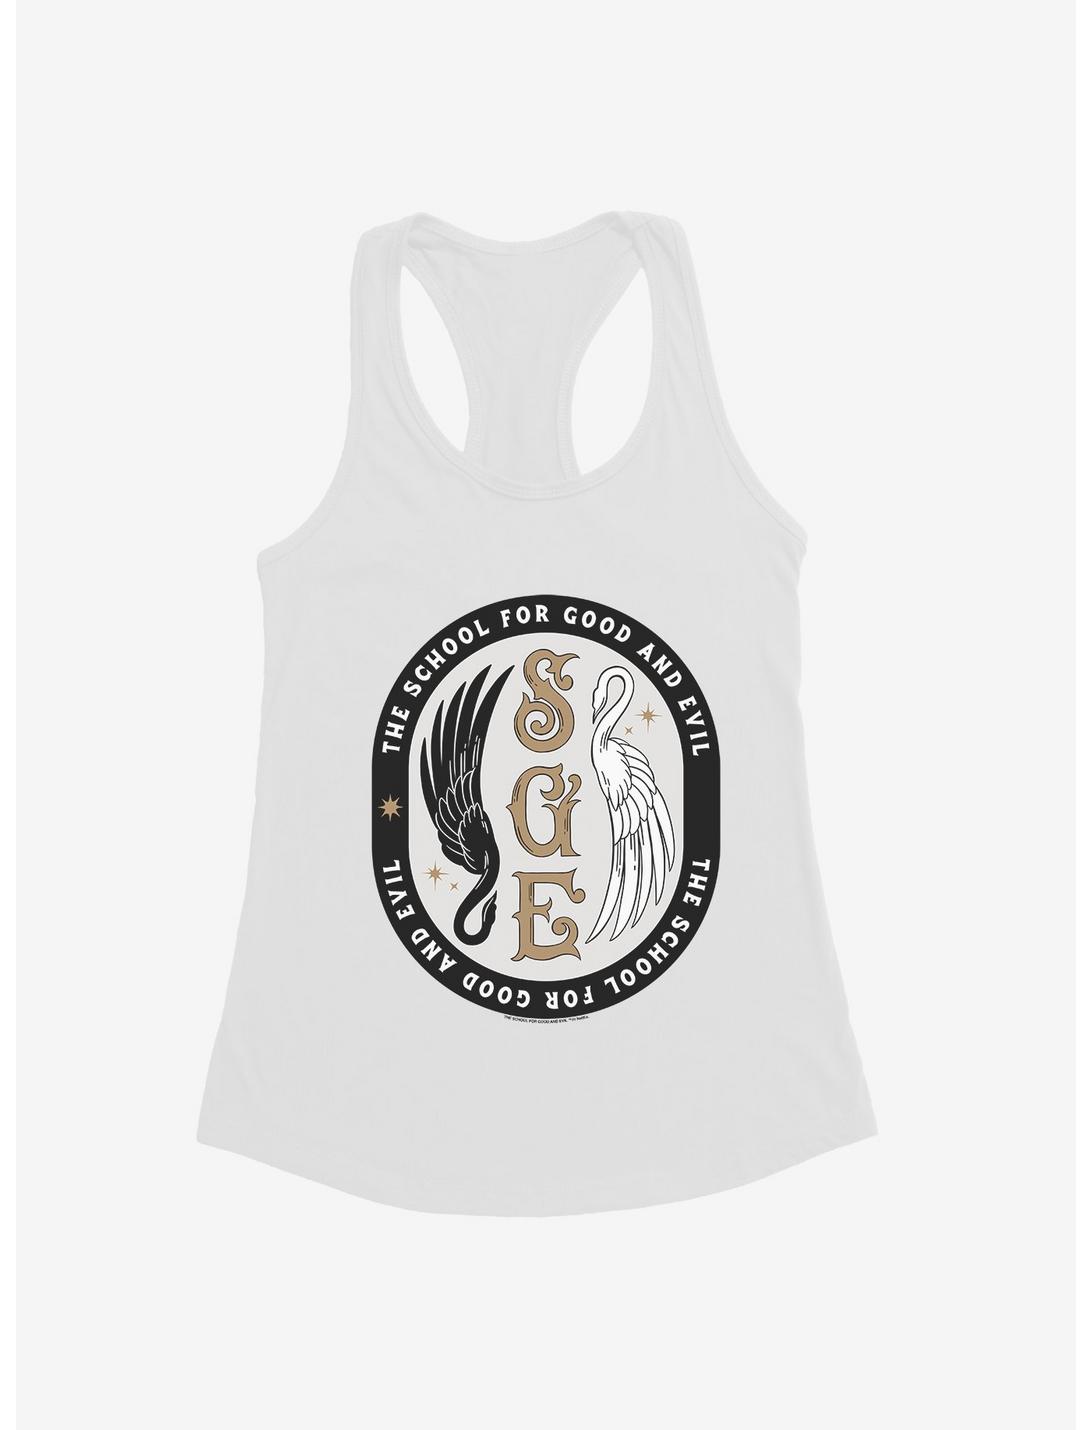 The School For Good And Evil Swan Emblem Womens Tank Top, WHITE, hi-res